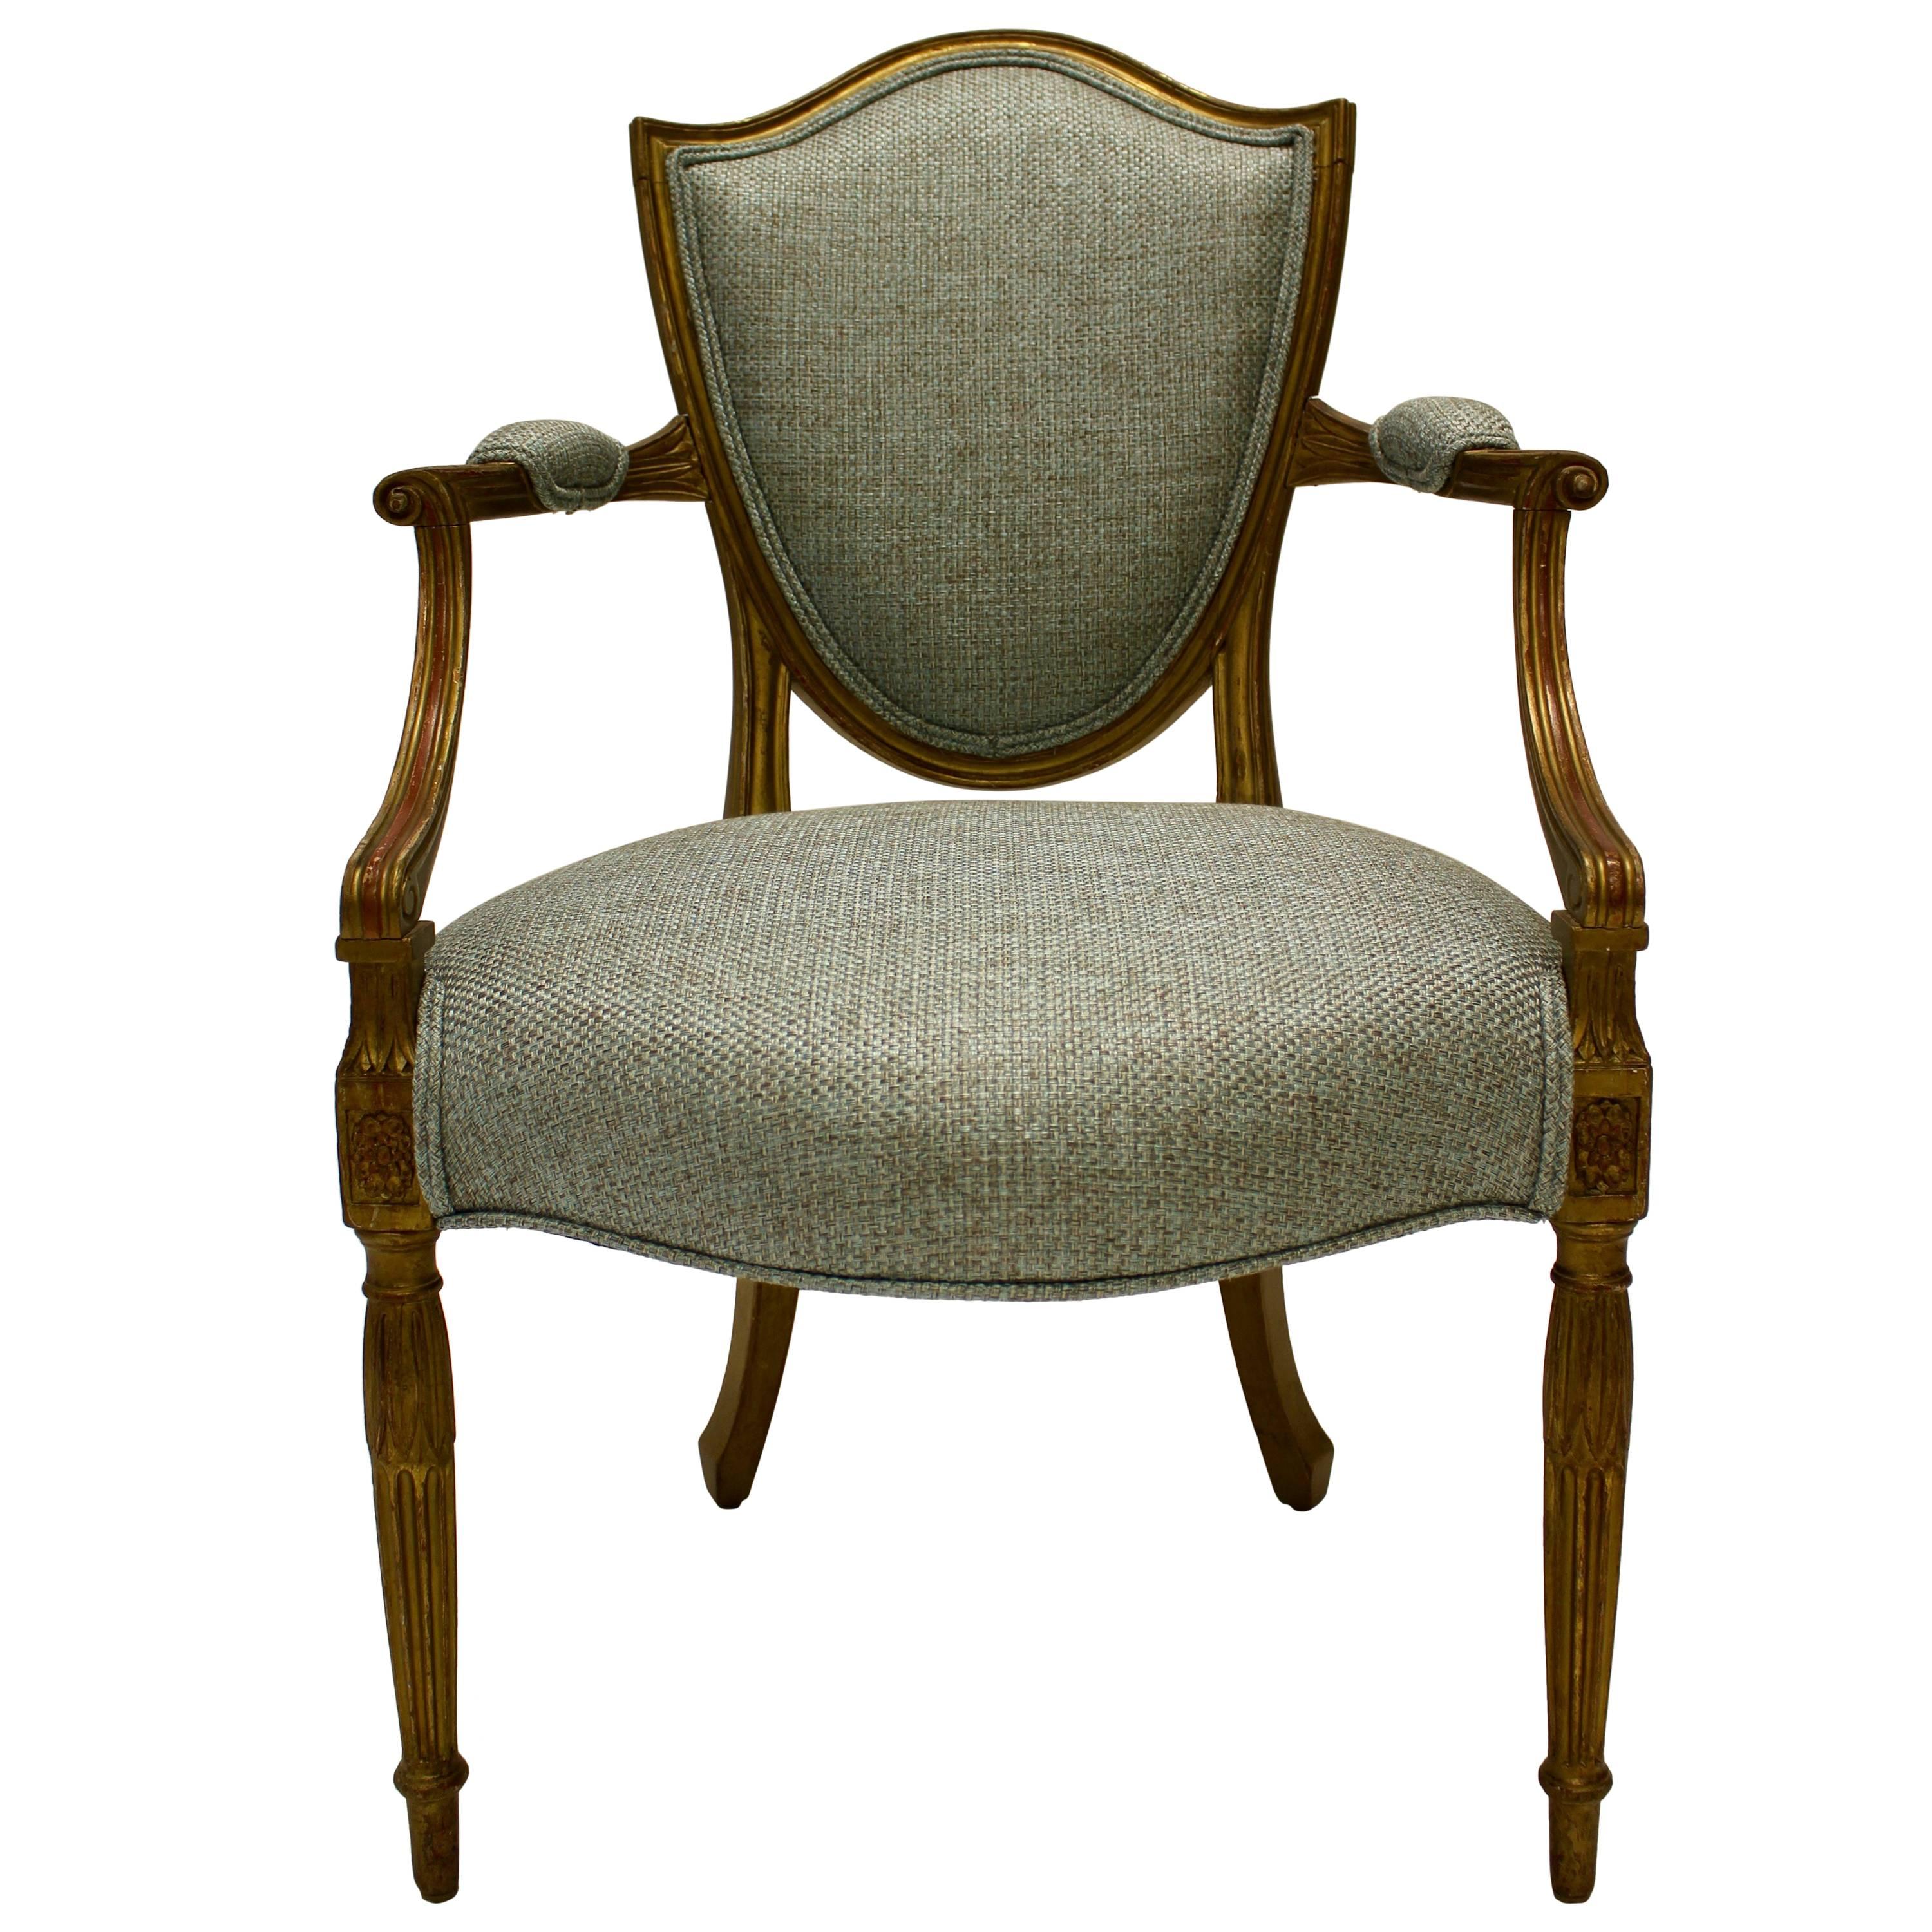 19th Century Hepplewhite Style Shield-Back Parcel-Gilt Armchair with Open Arms